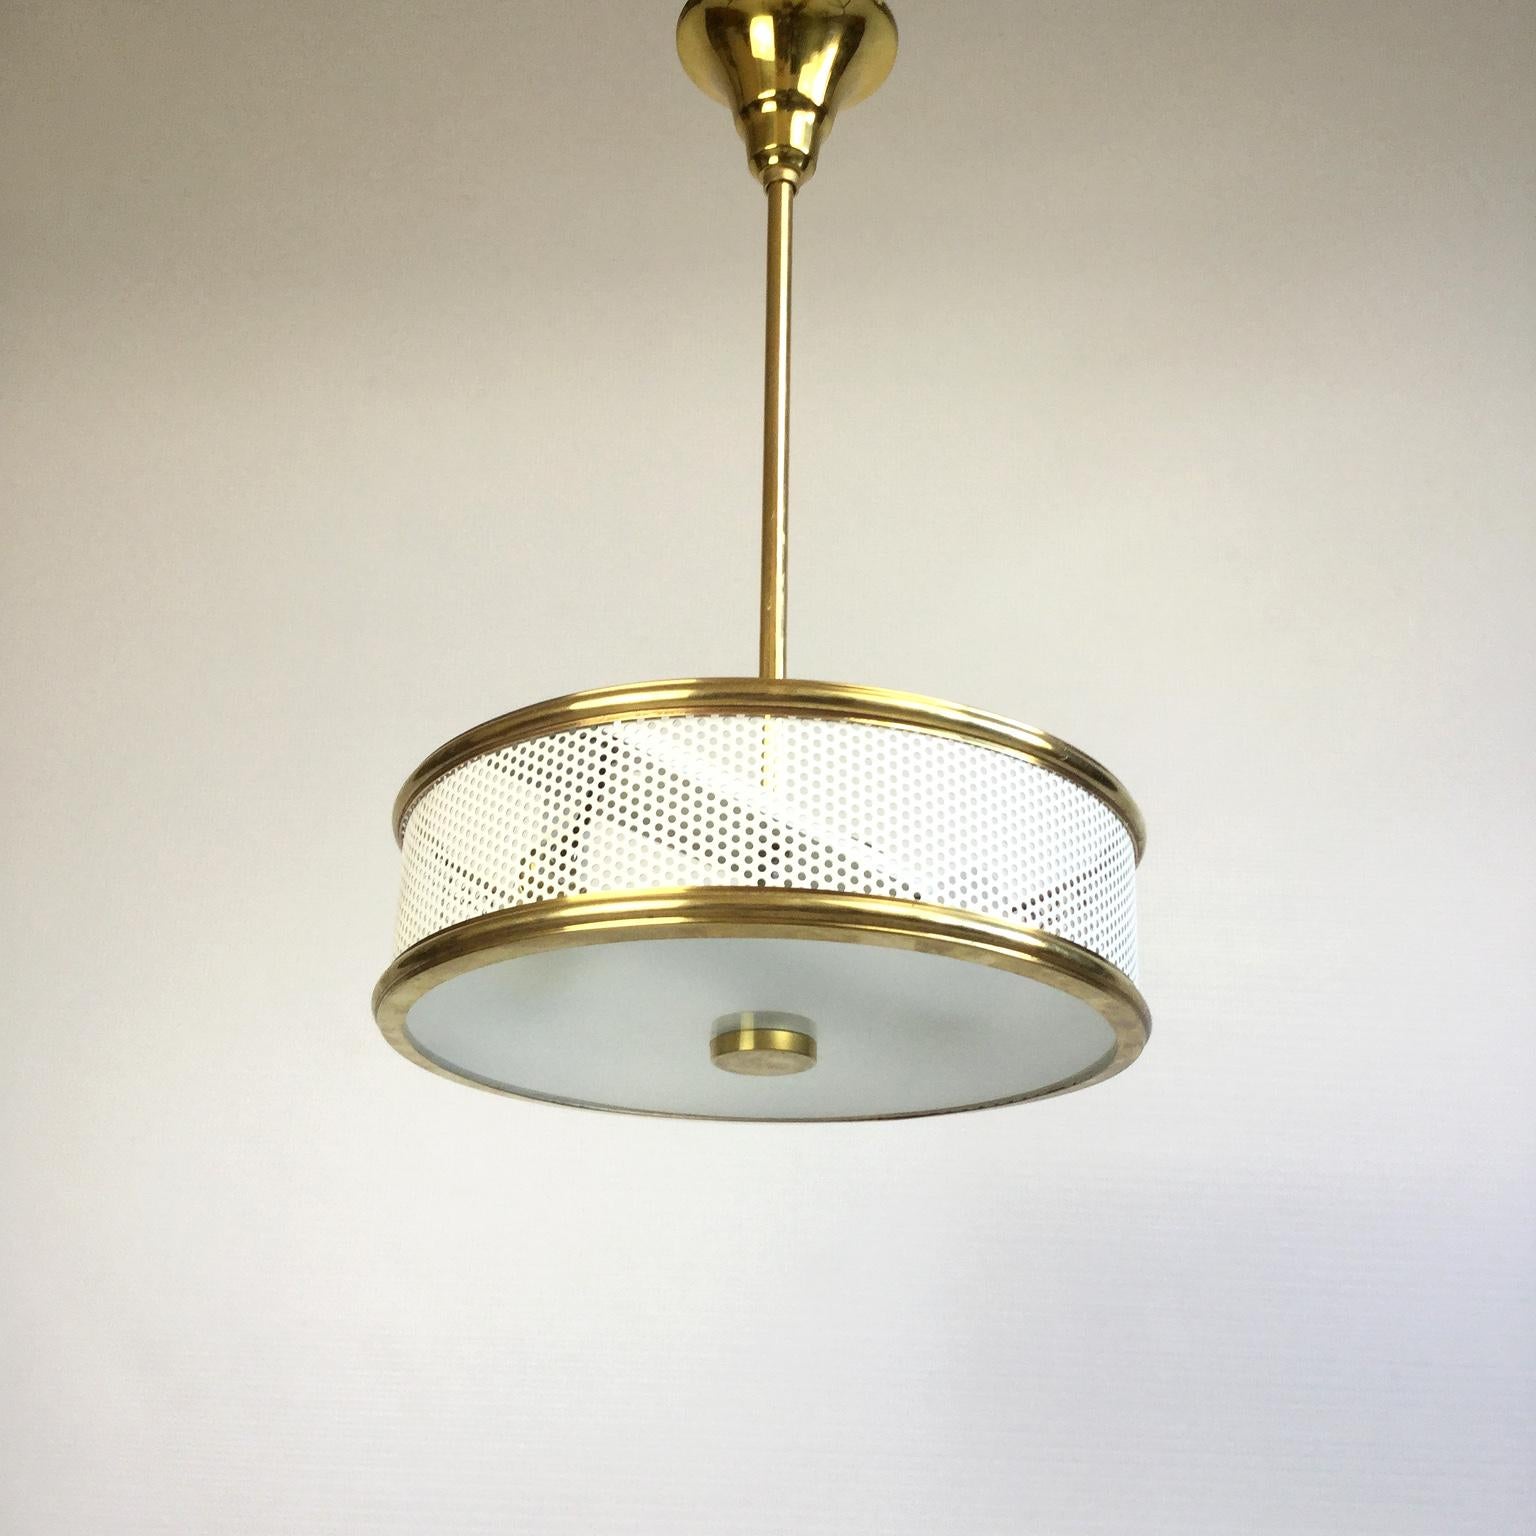 Hanging lamp from the 1950s with a white perforated metal lampshade and a frosted glass
Completely rewired with 2 lamp sockets.